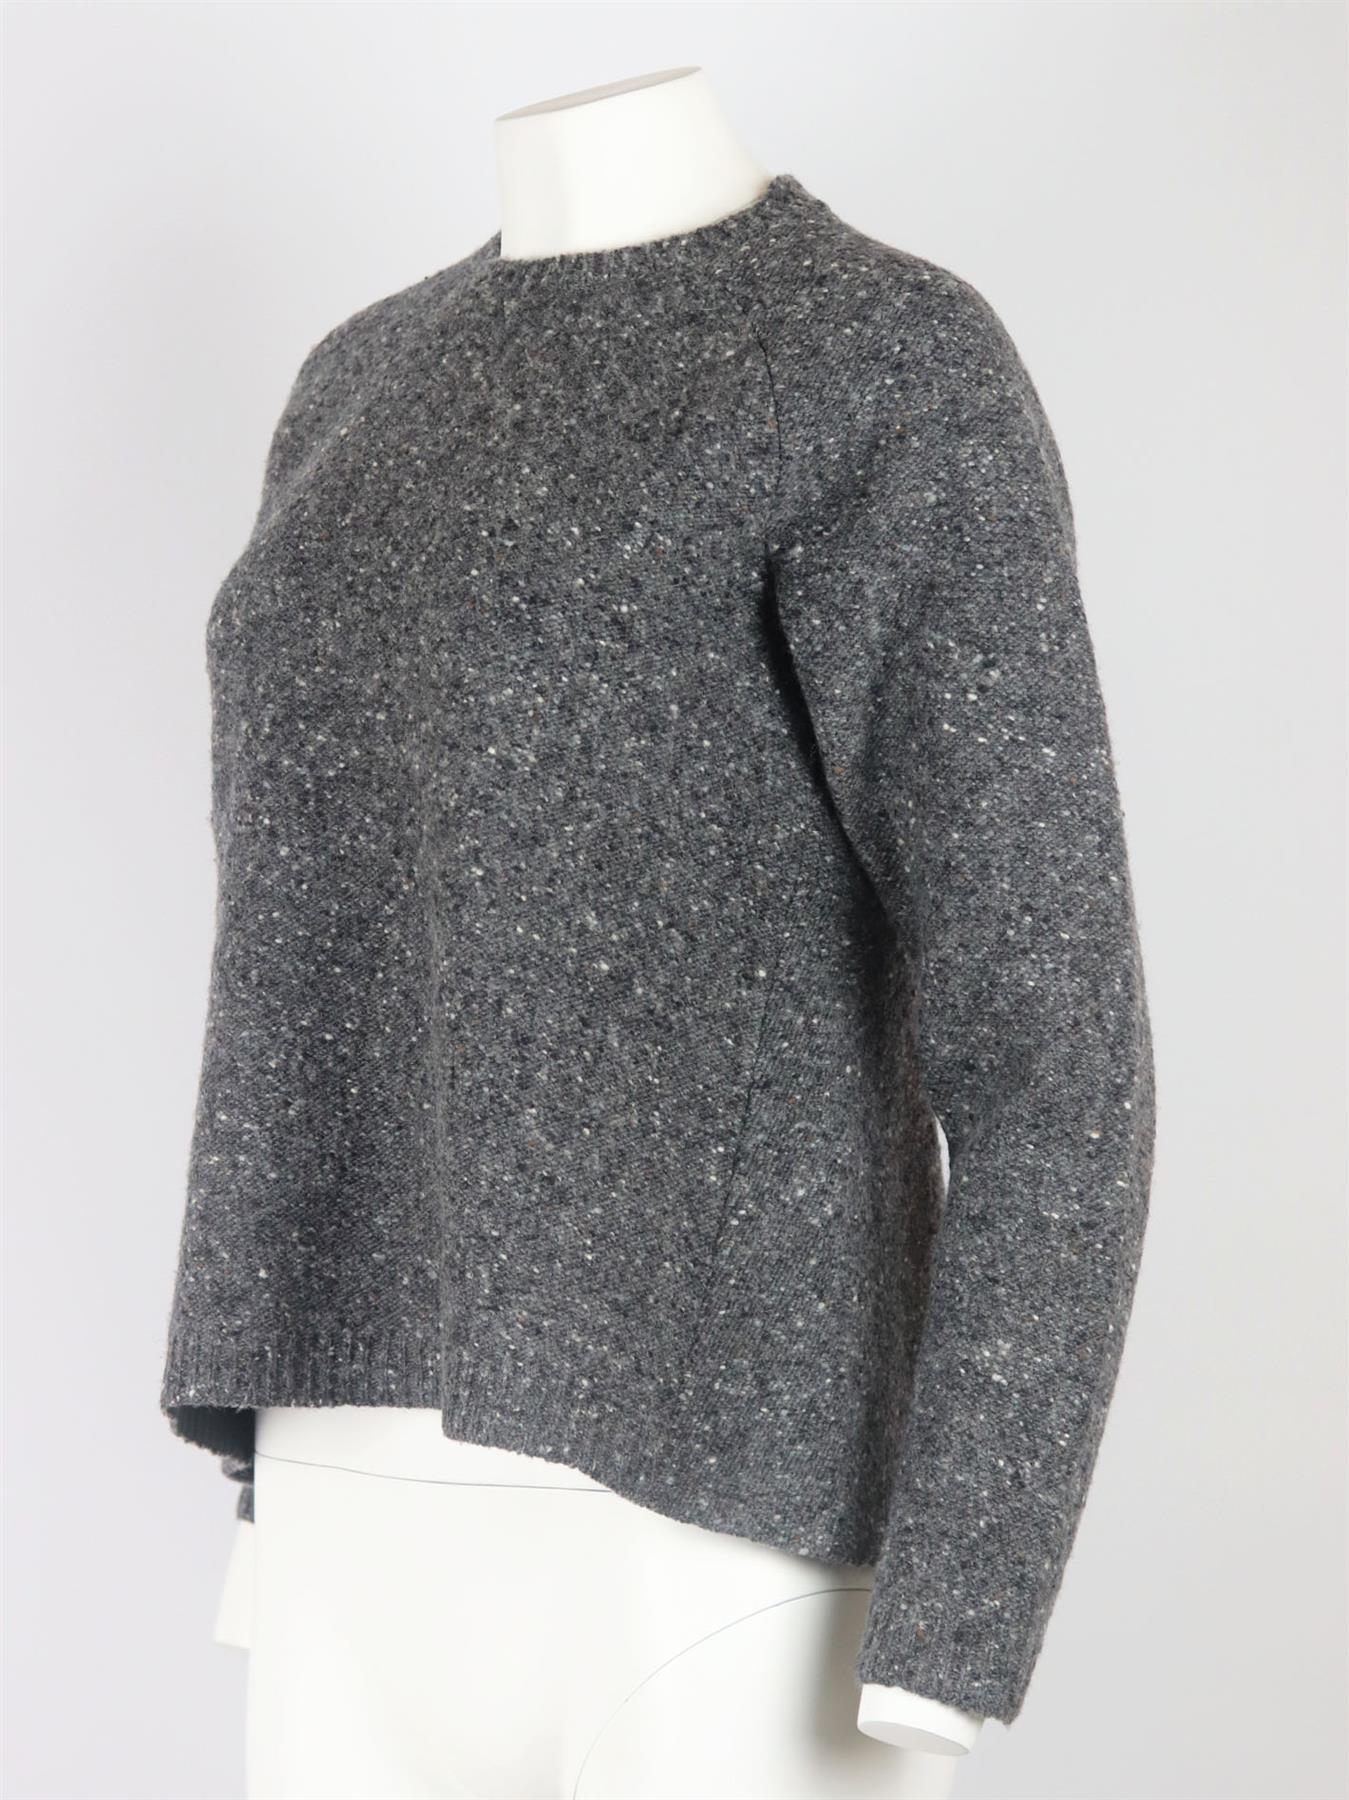 Valentino's sweater is designed in a classic crew-neck shape at the front and slight peplum silhouette at the back, it's been made in Italy from wool that's blended with tonal grey textured tones. Grey wool. Slips on. 100% Wool. Size: Small (UK 8,